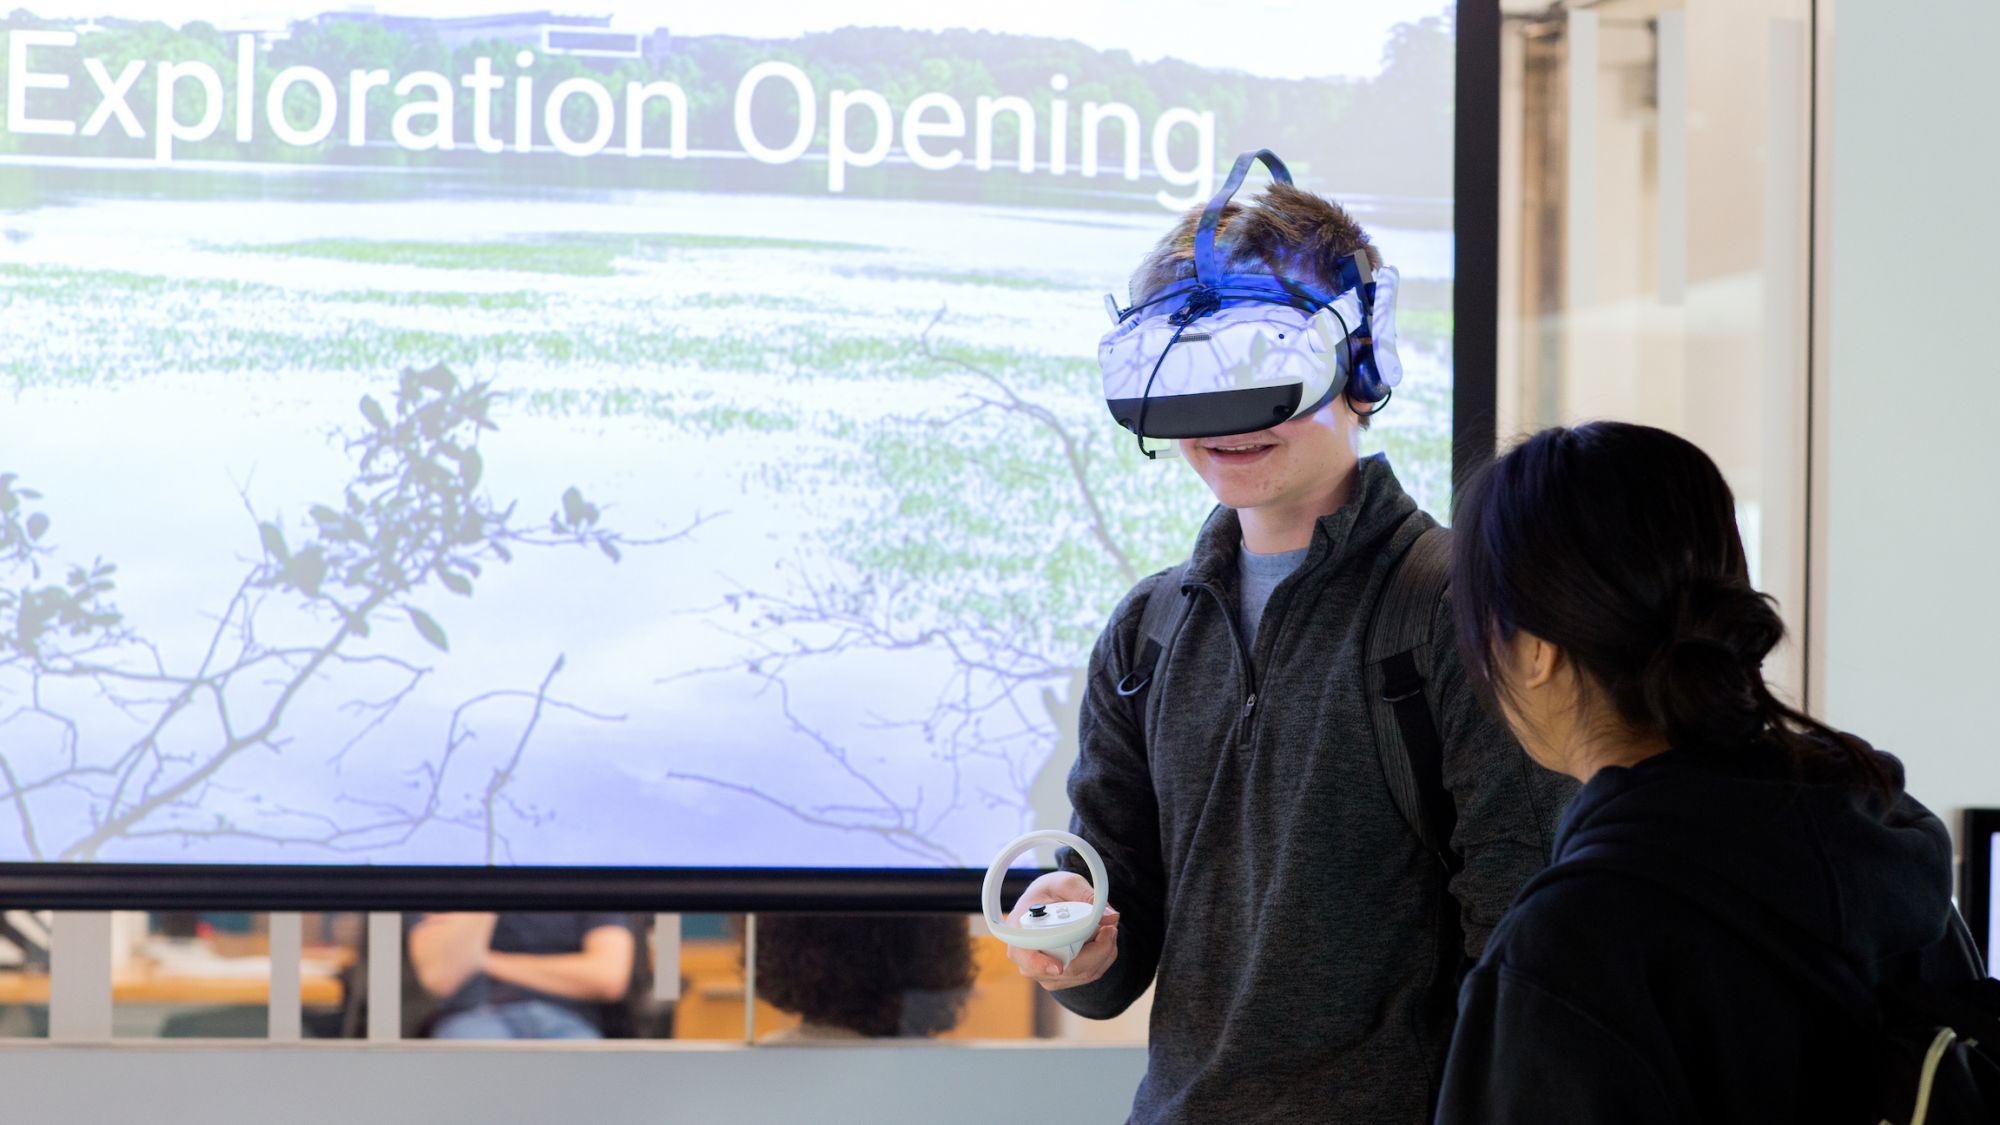 A student wears a virtual reality (VR) headset, with another student standing nearby to assist, in front of a projected image of a natural setting.